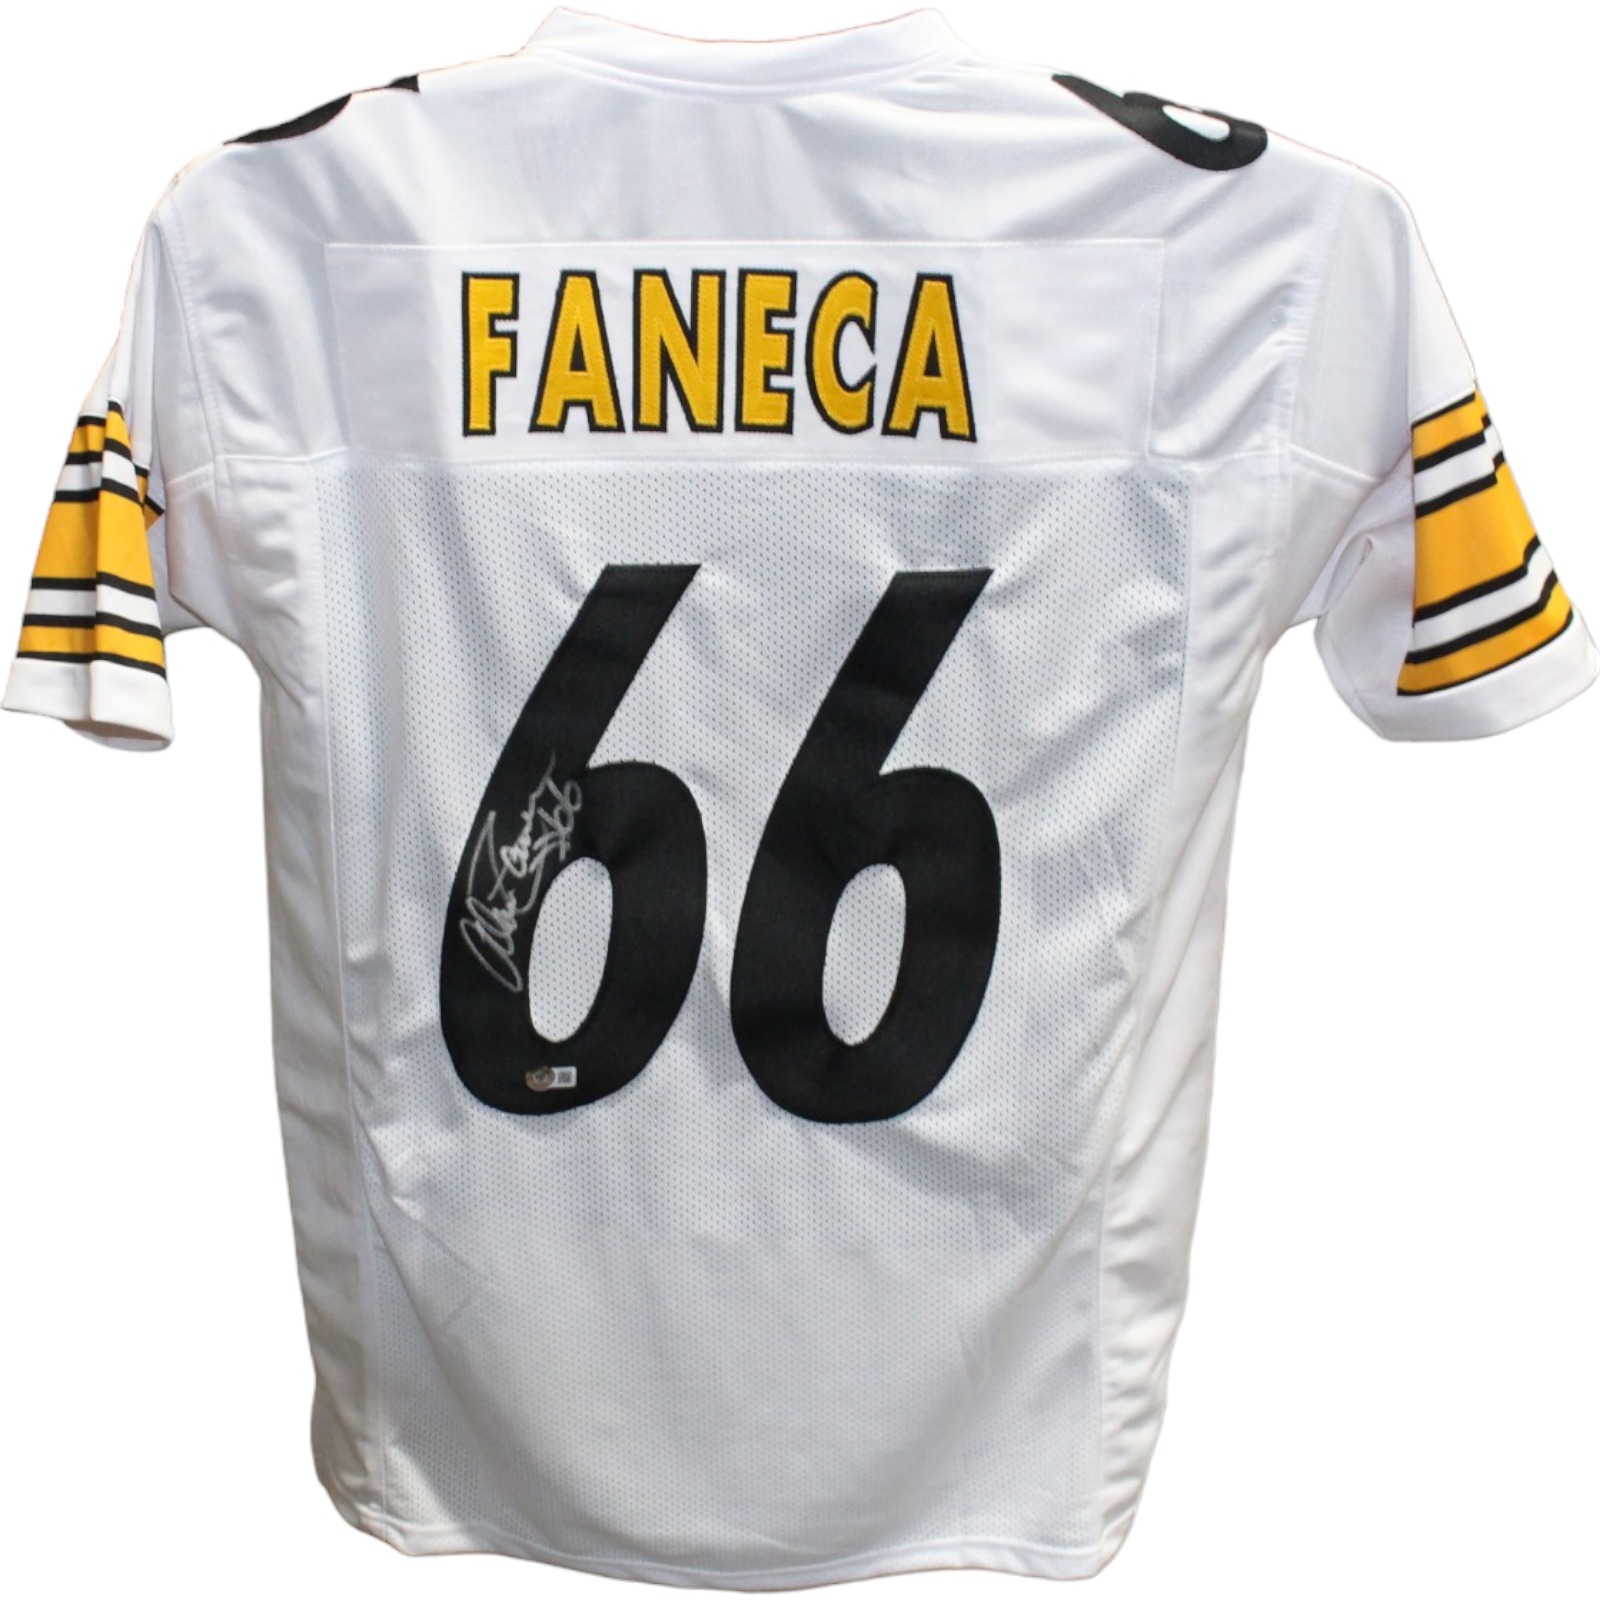 Alan Faneca Autographed/Signed Pro Style White Jersey Beckett